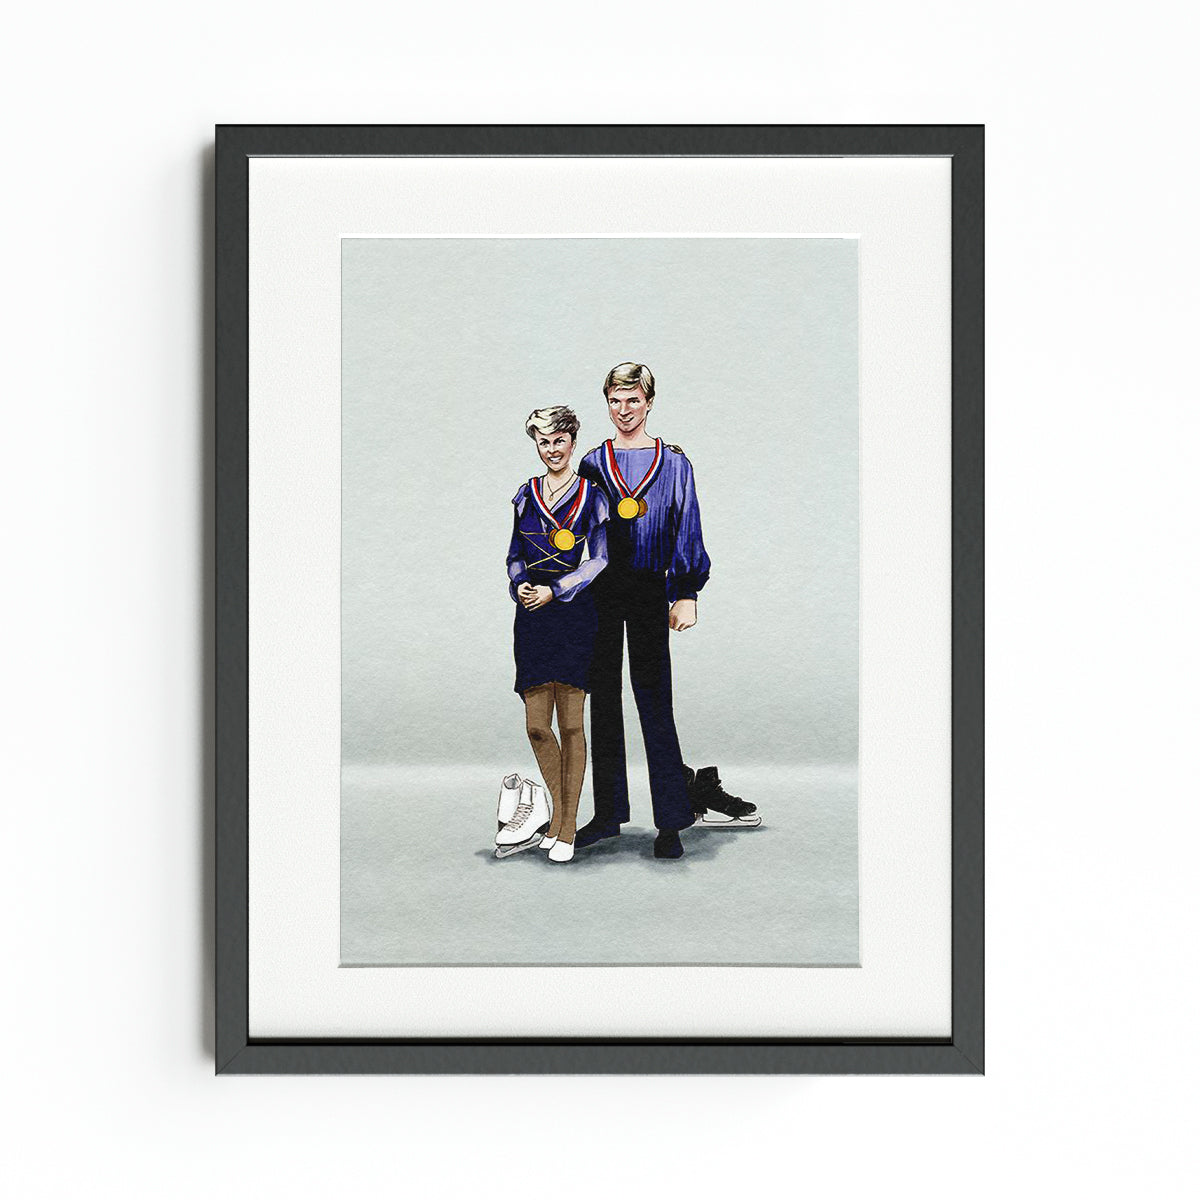 Illustrated Torvill and Dean Team GB Art Print